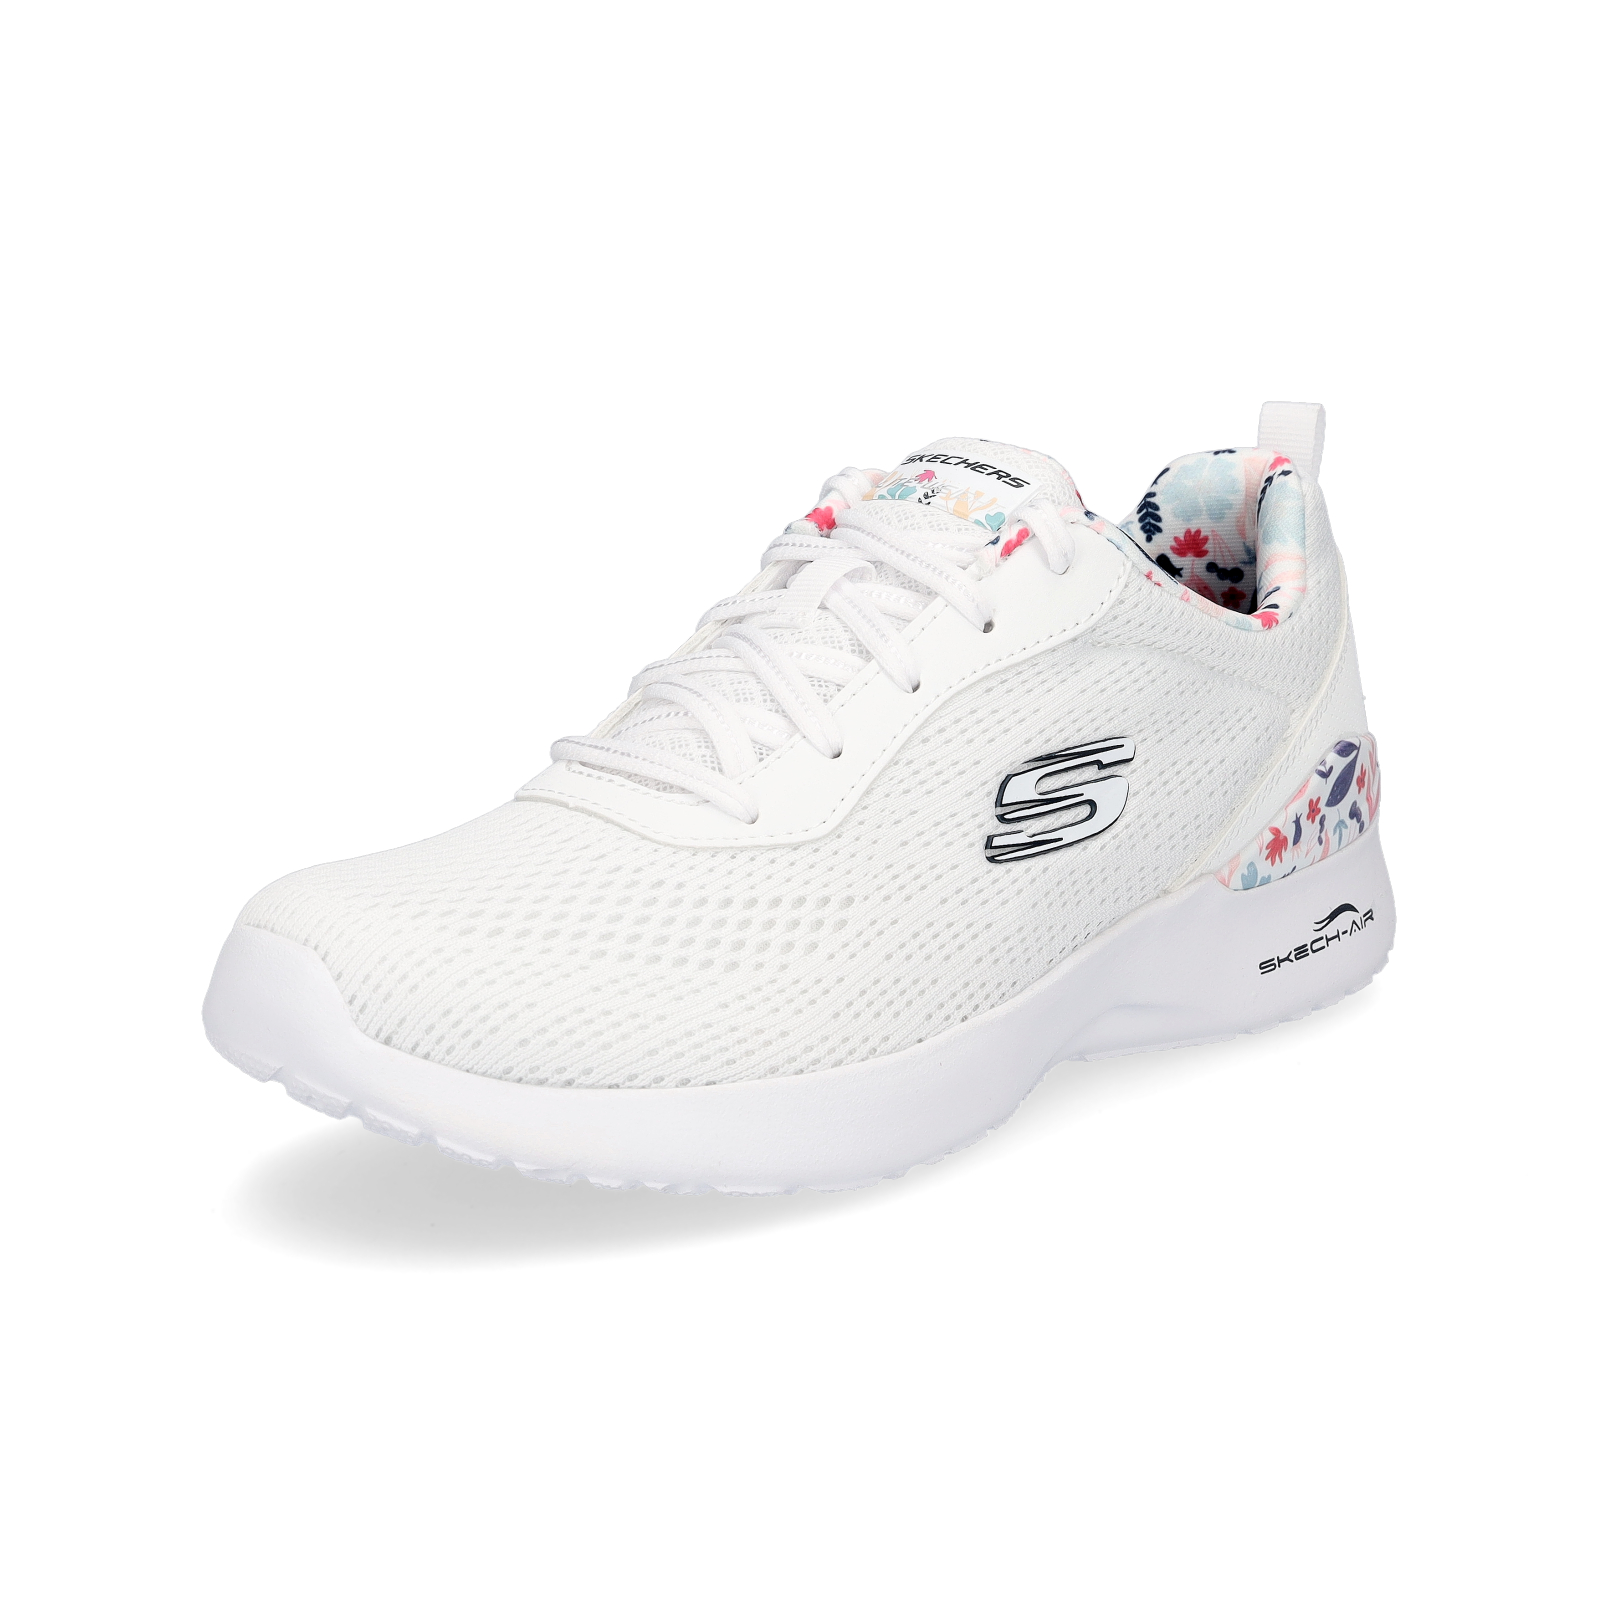 Кроссовки Skechers Skech Air Dynamight Laid Out, белый кроссовки skechers skech air dynamight big step